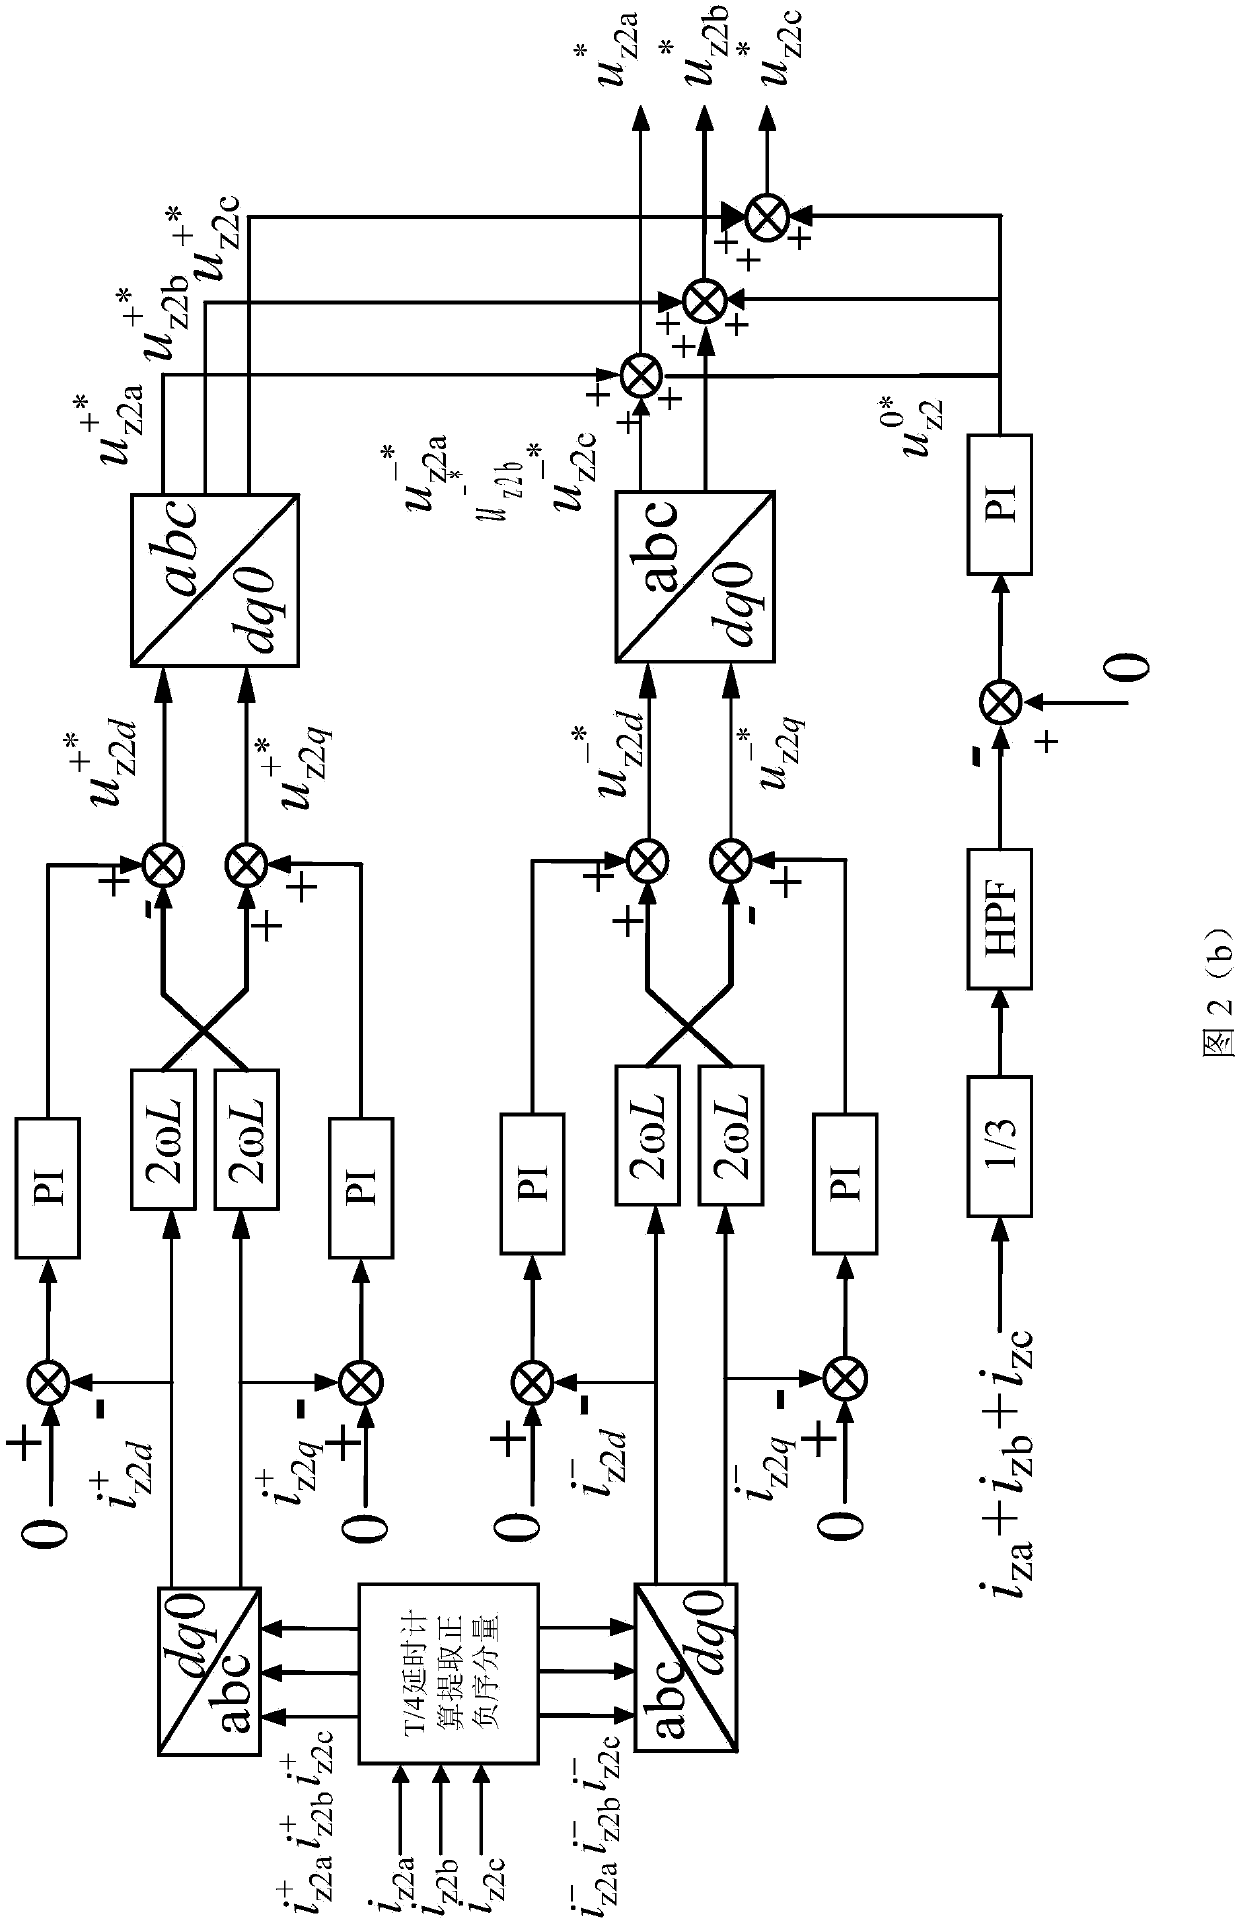 MMC-PET control method for supplying power to a passive network on the basis of power grid voltage faults